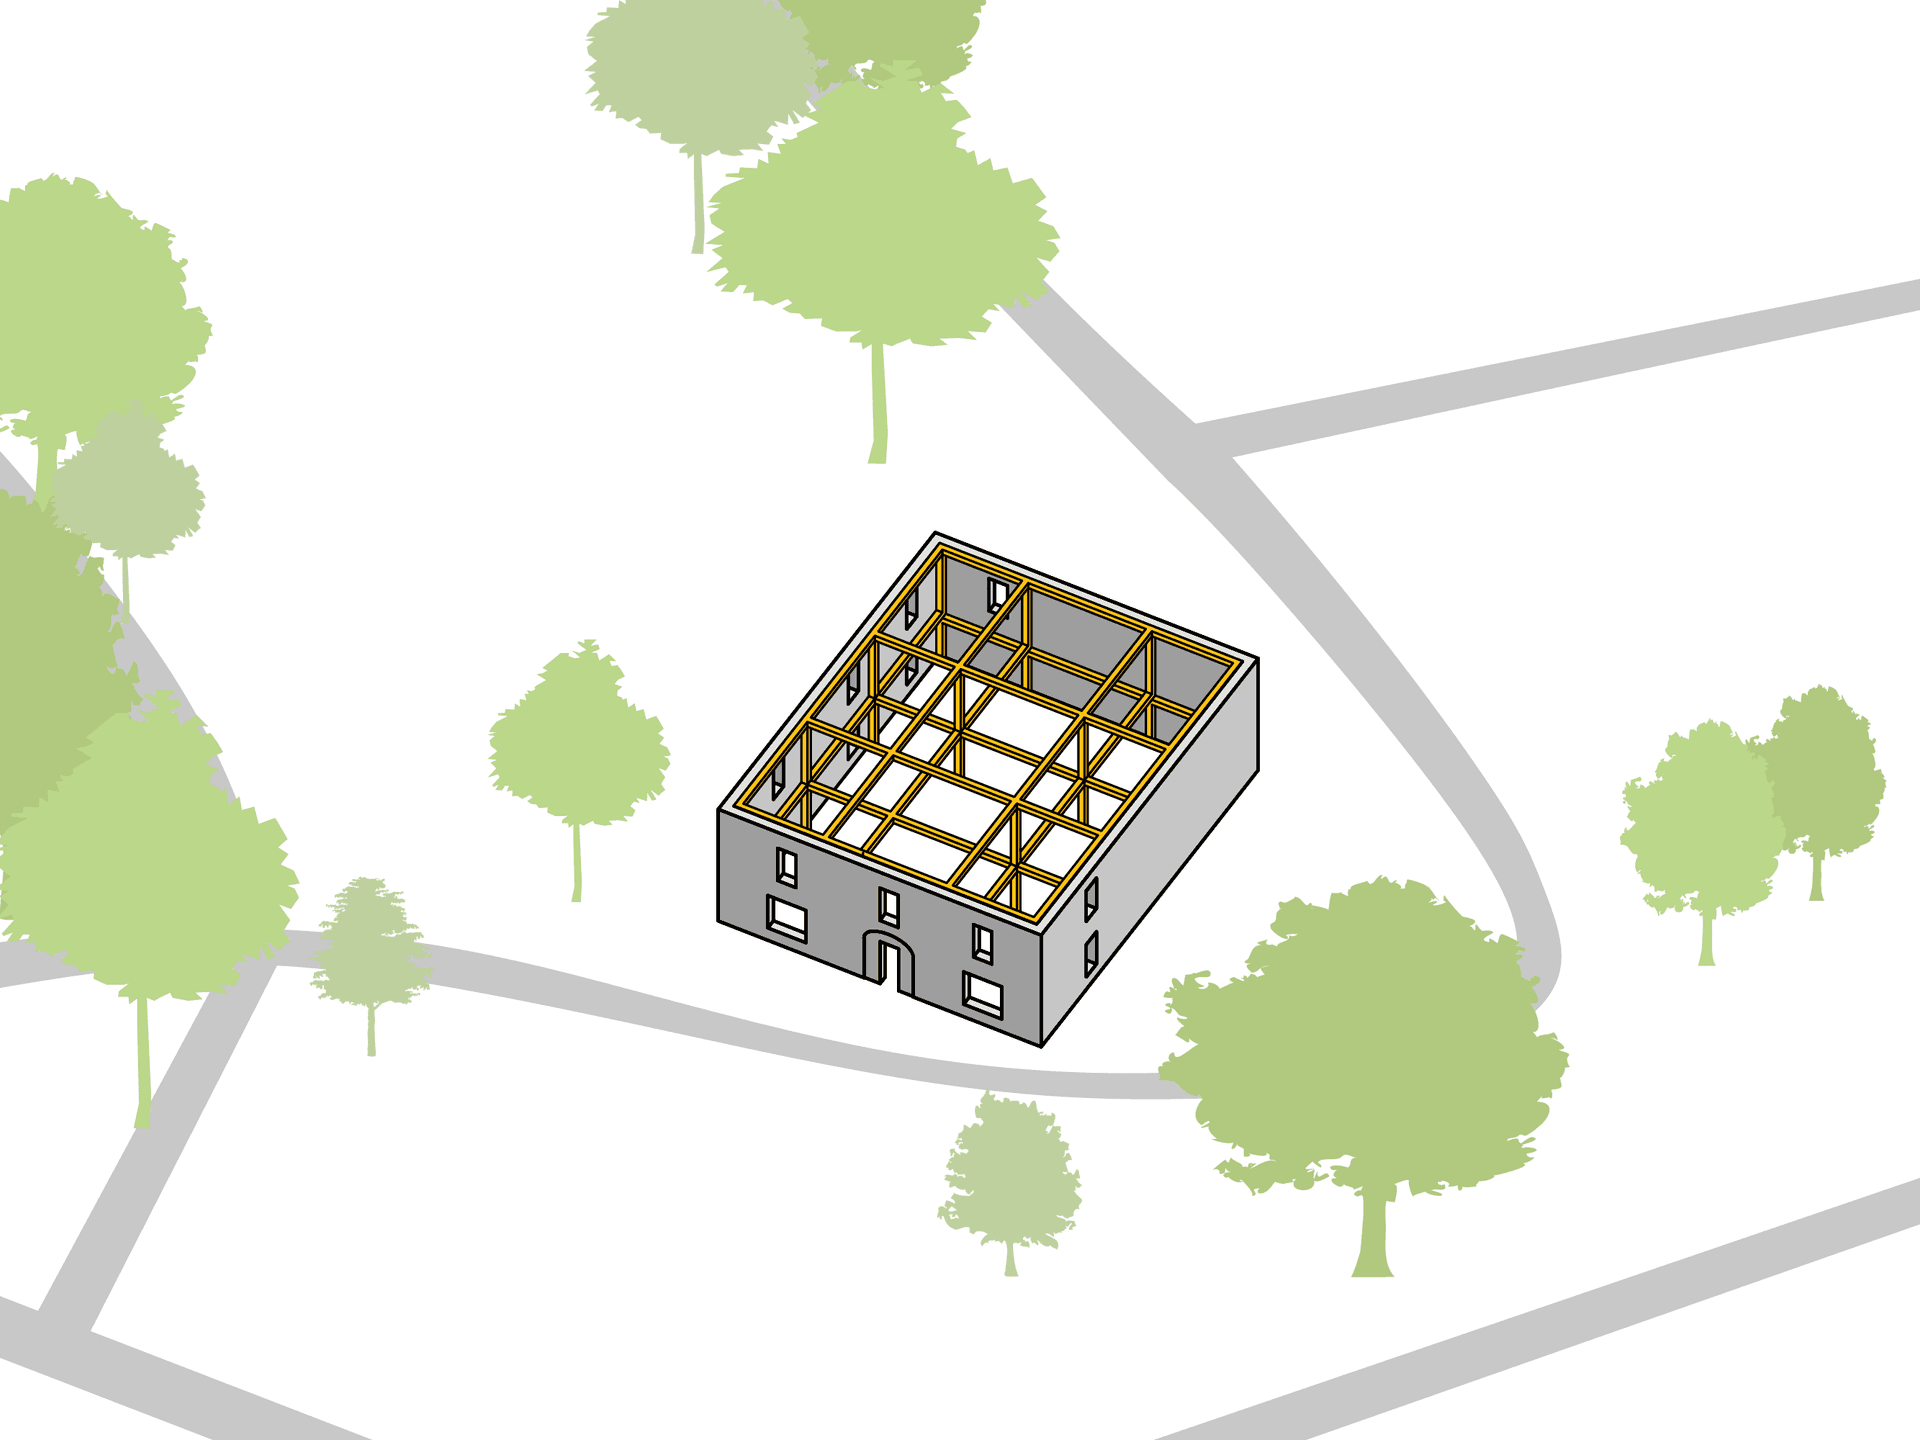 A timber structure will brace the exterior wall creating a new frame for uses to inhabit.